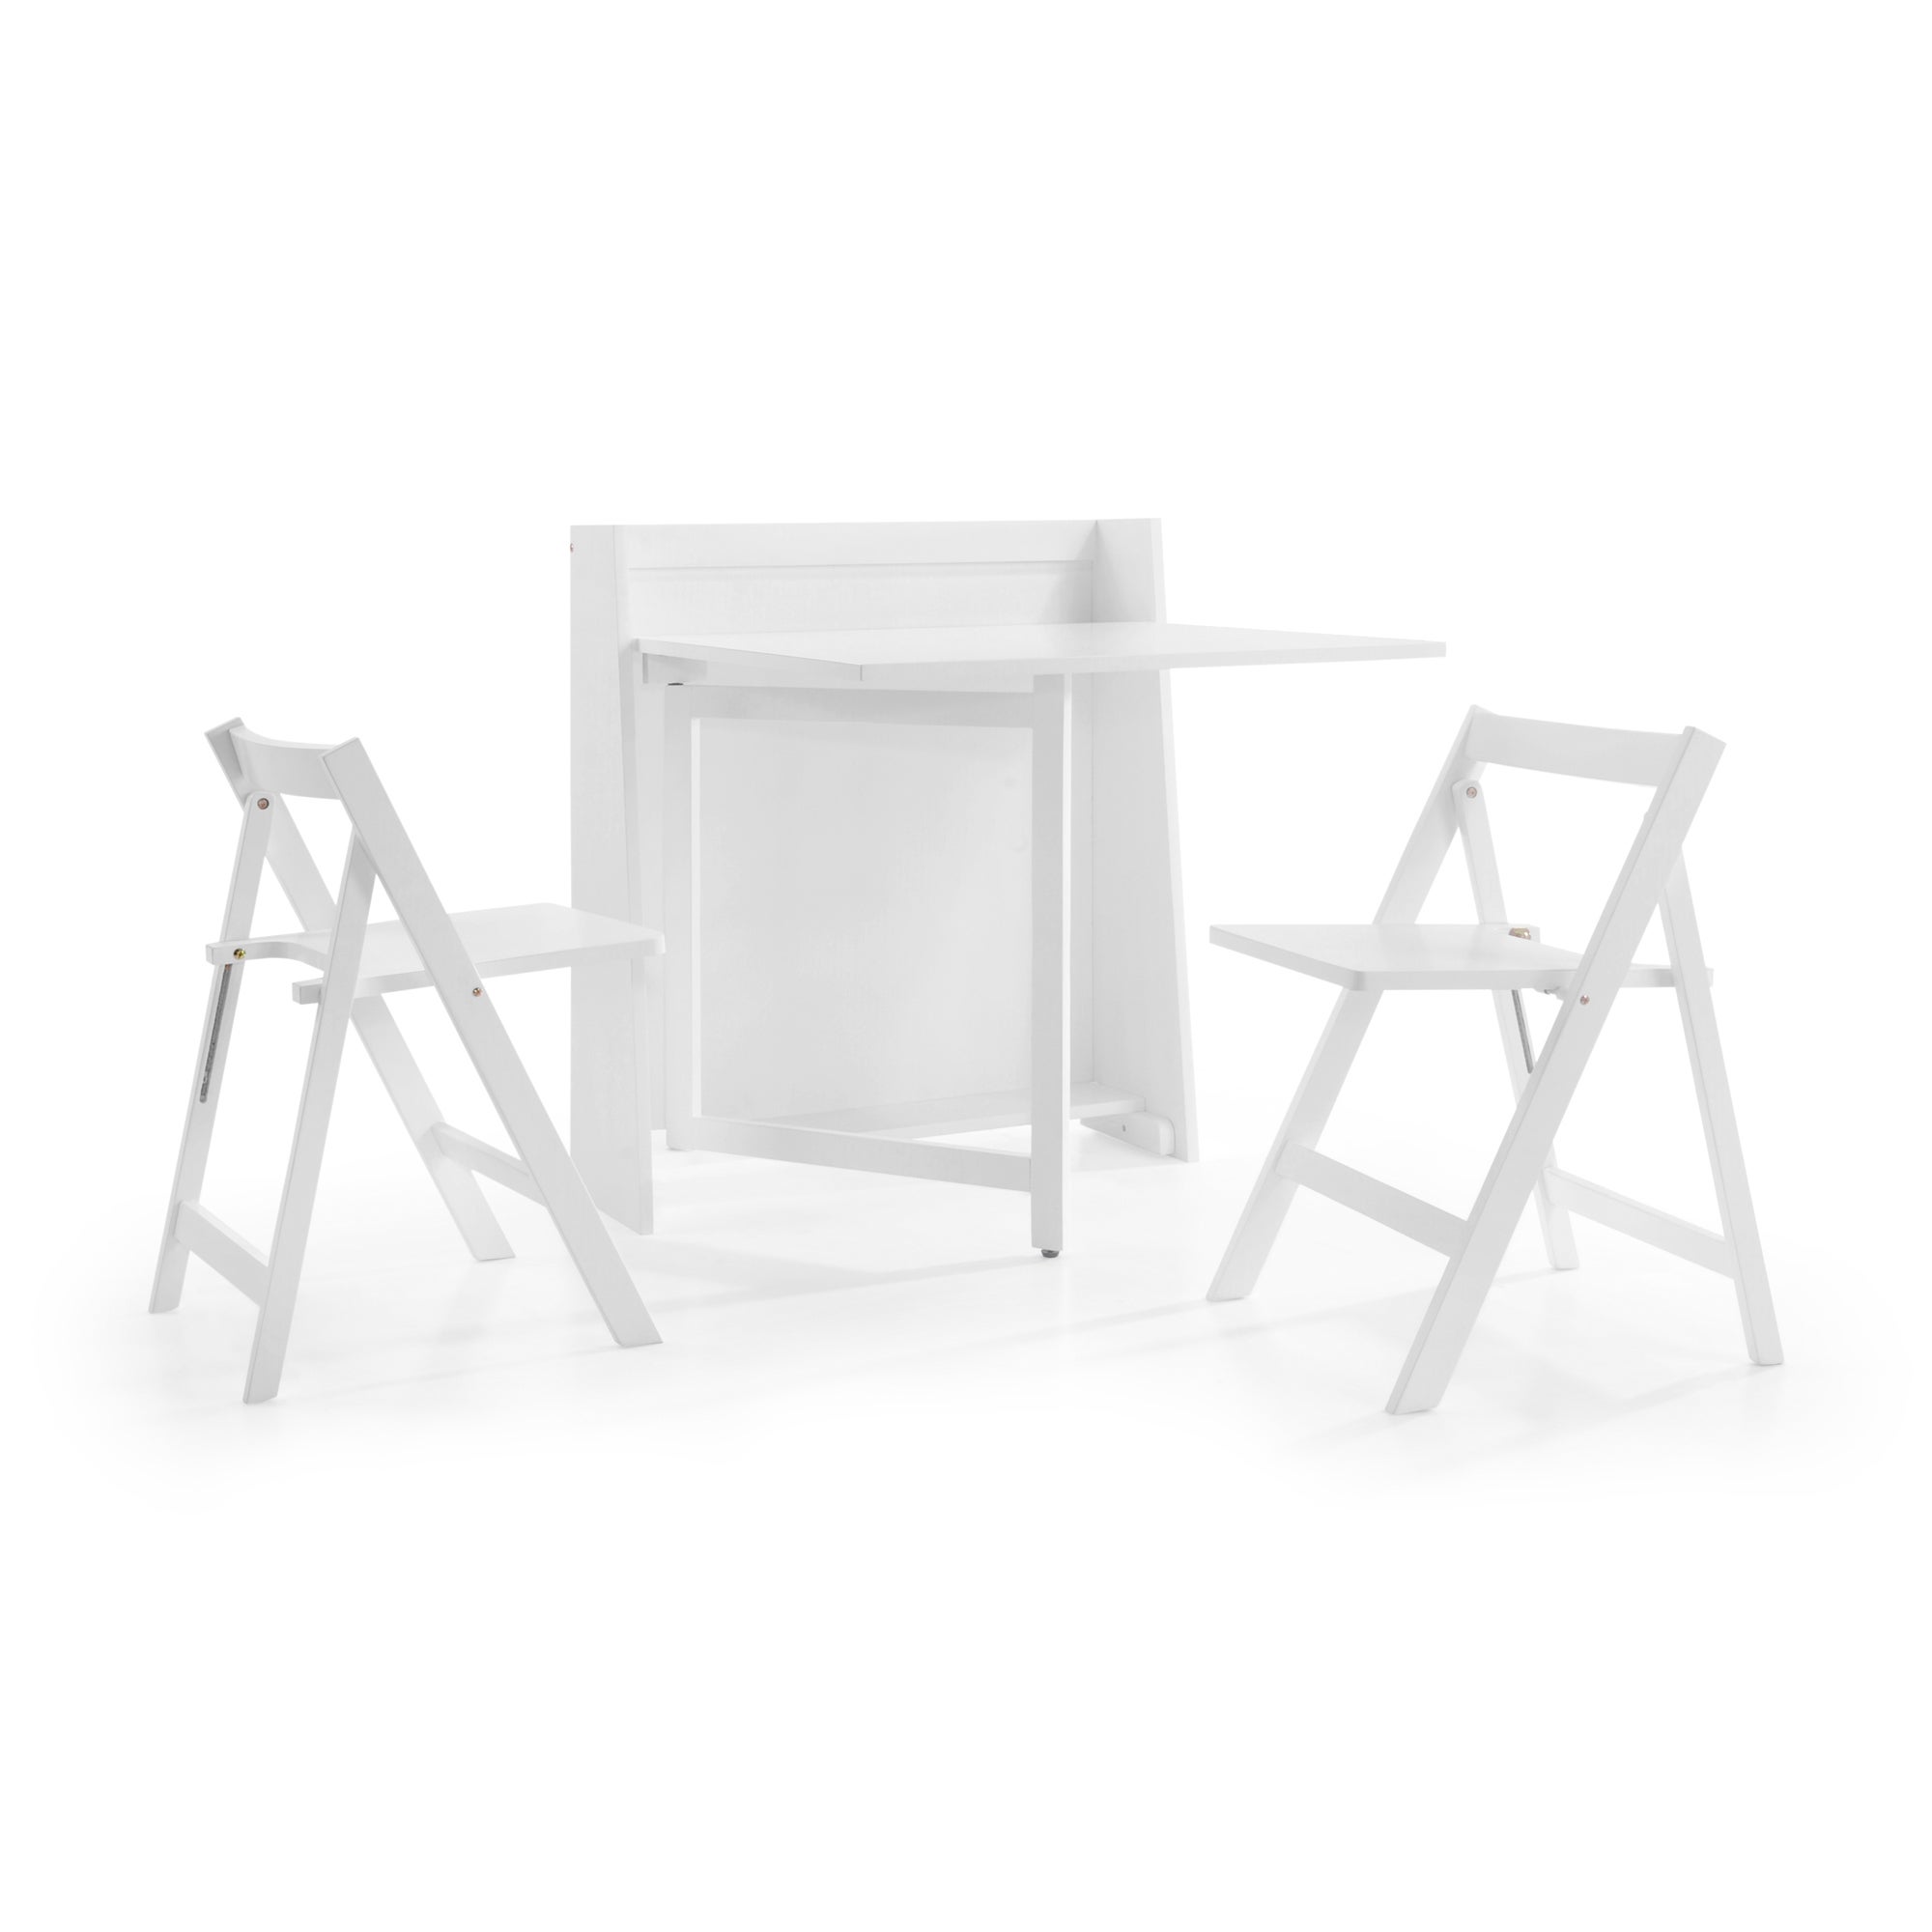 Helsinki Compact Dining Table and 2 Chairs White